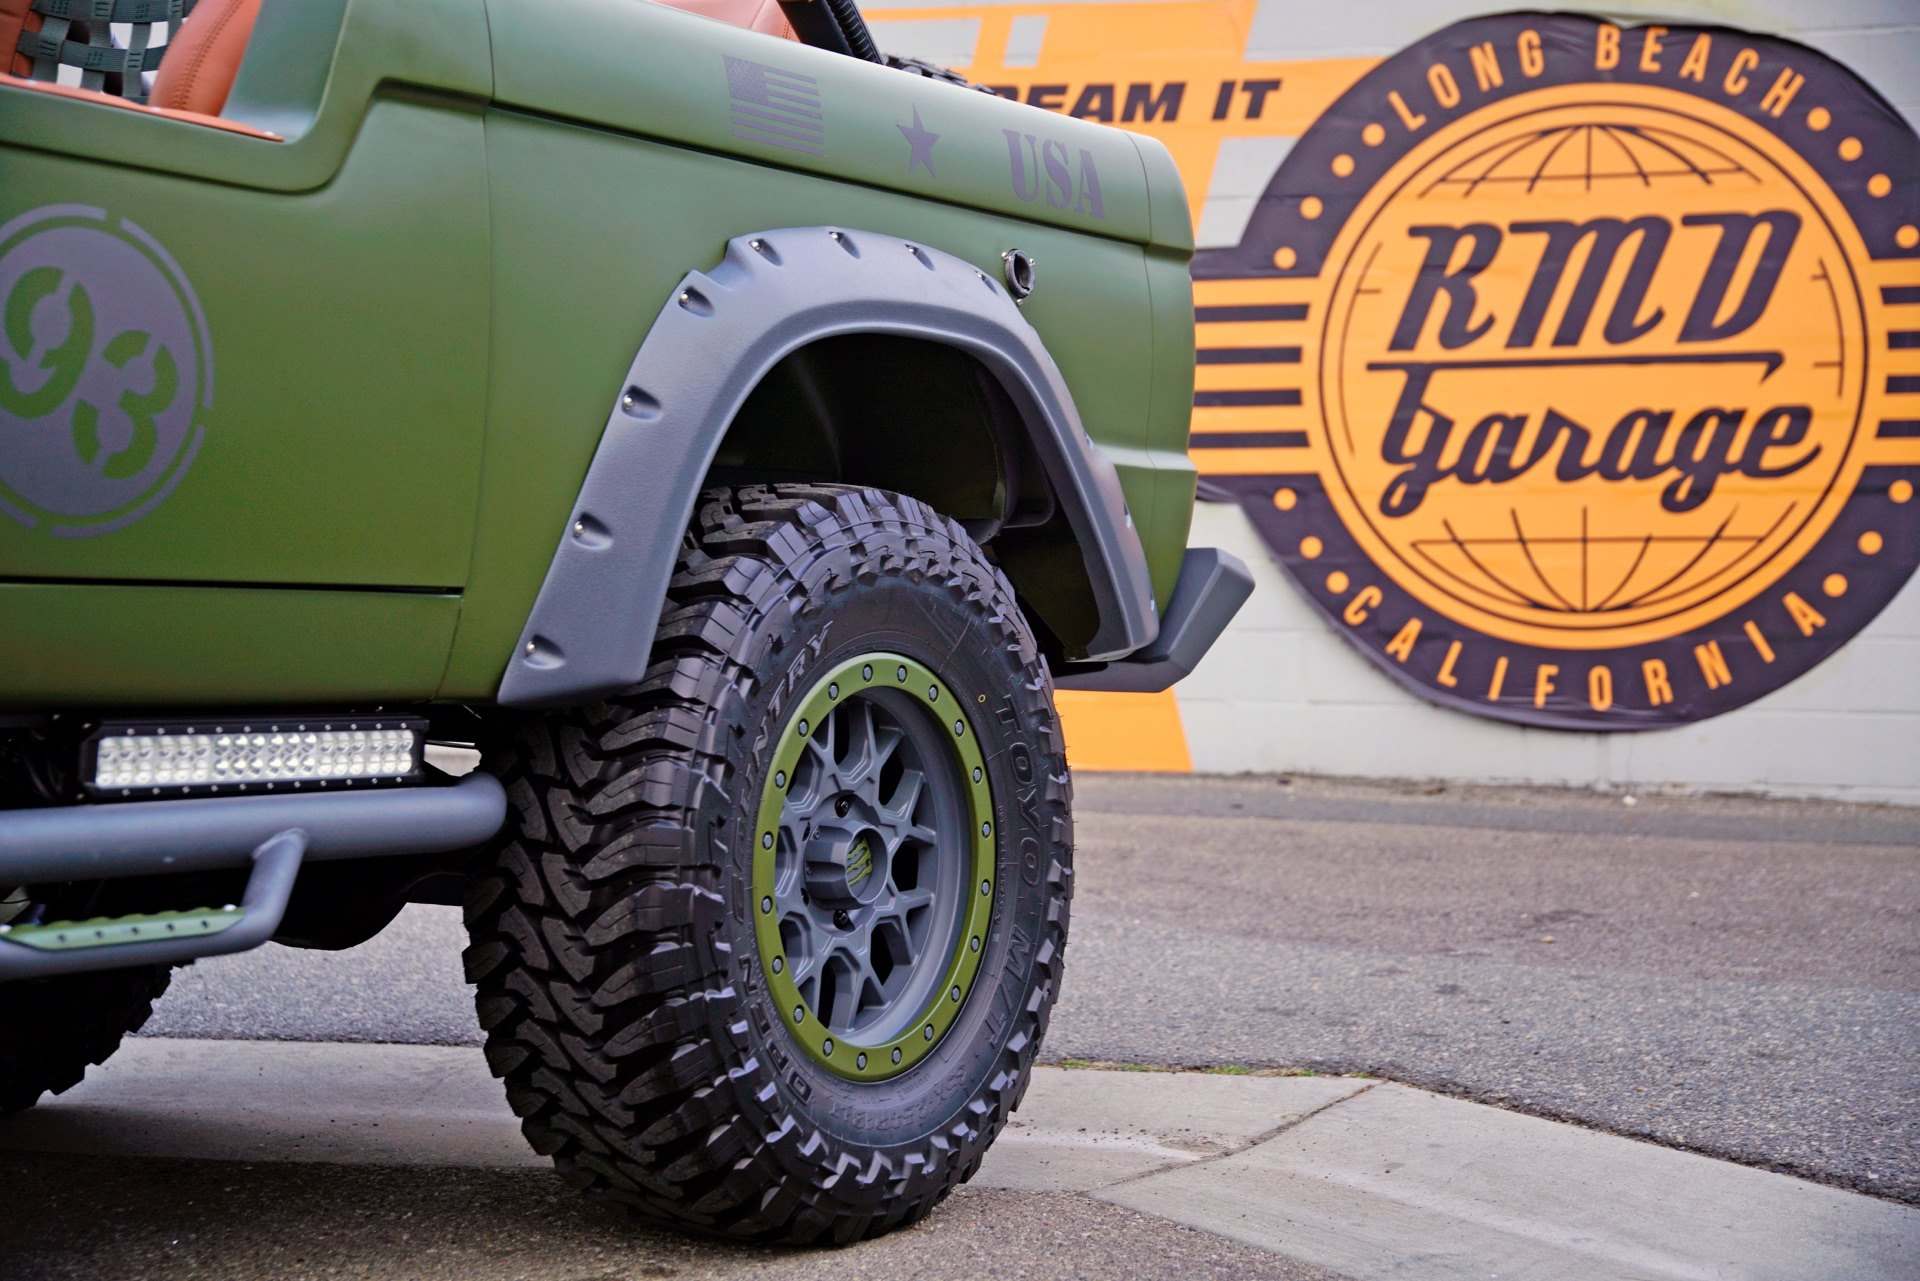 Pocket Style Fender Flares on Geeen Ford Bronco - Photo by Dropstar